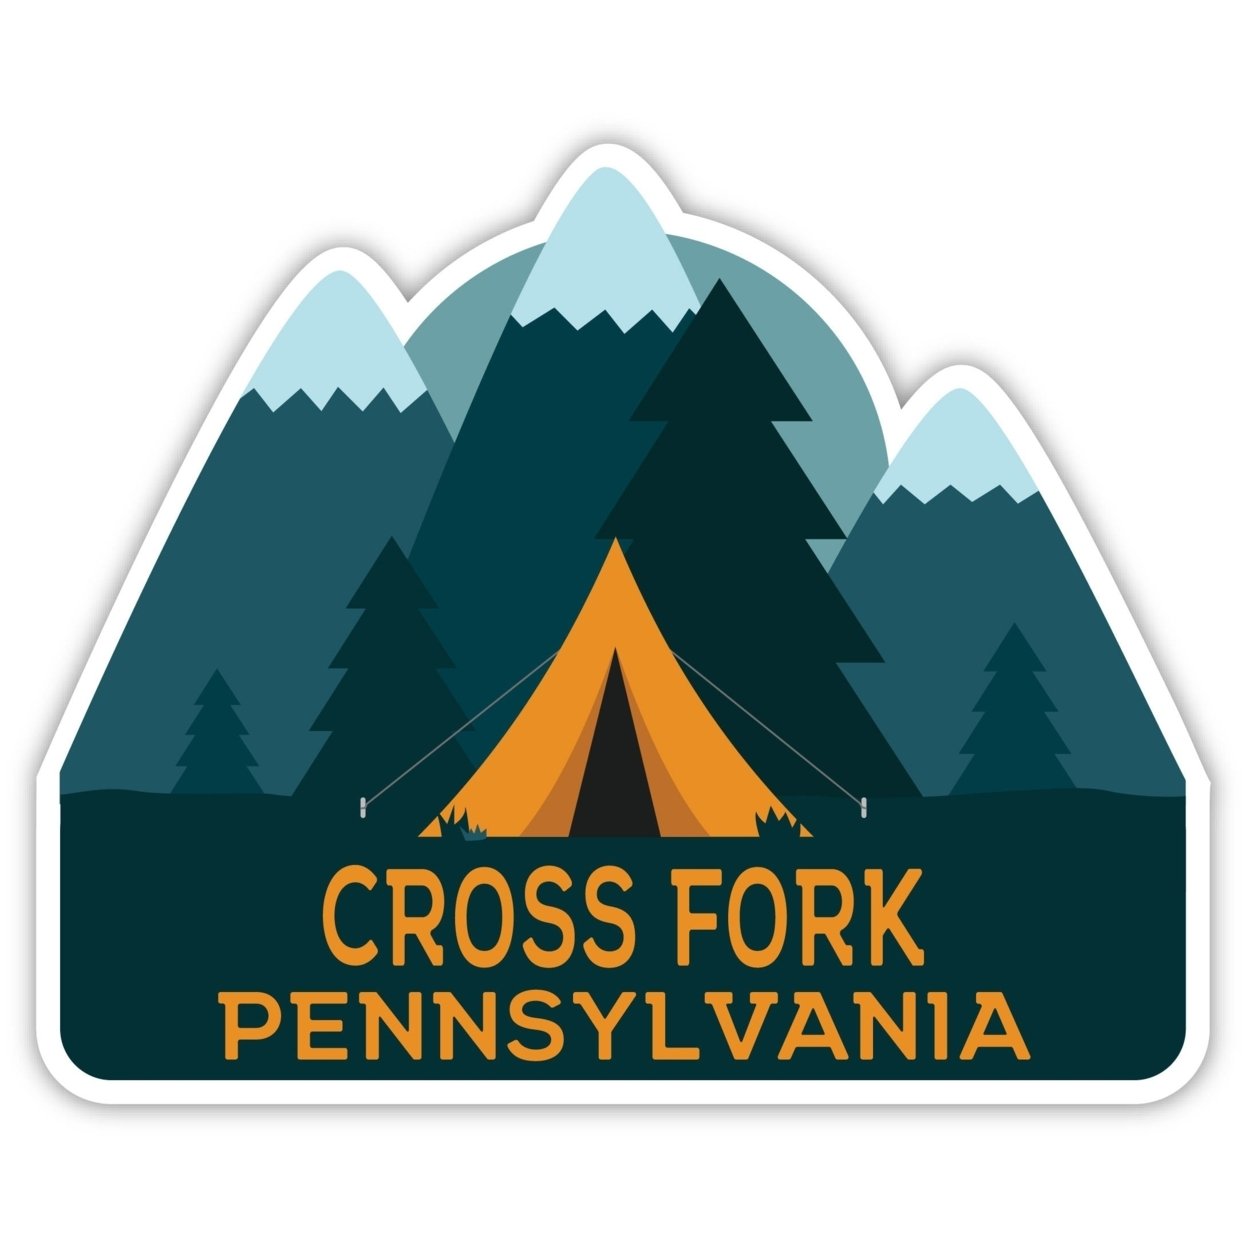 Cross Fork Pennsylvania Souvenir Decorative Stickers (Choose Theme And Size) - 4-Pack, 2-Inch, Tent